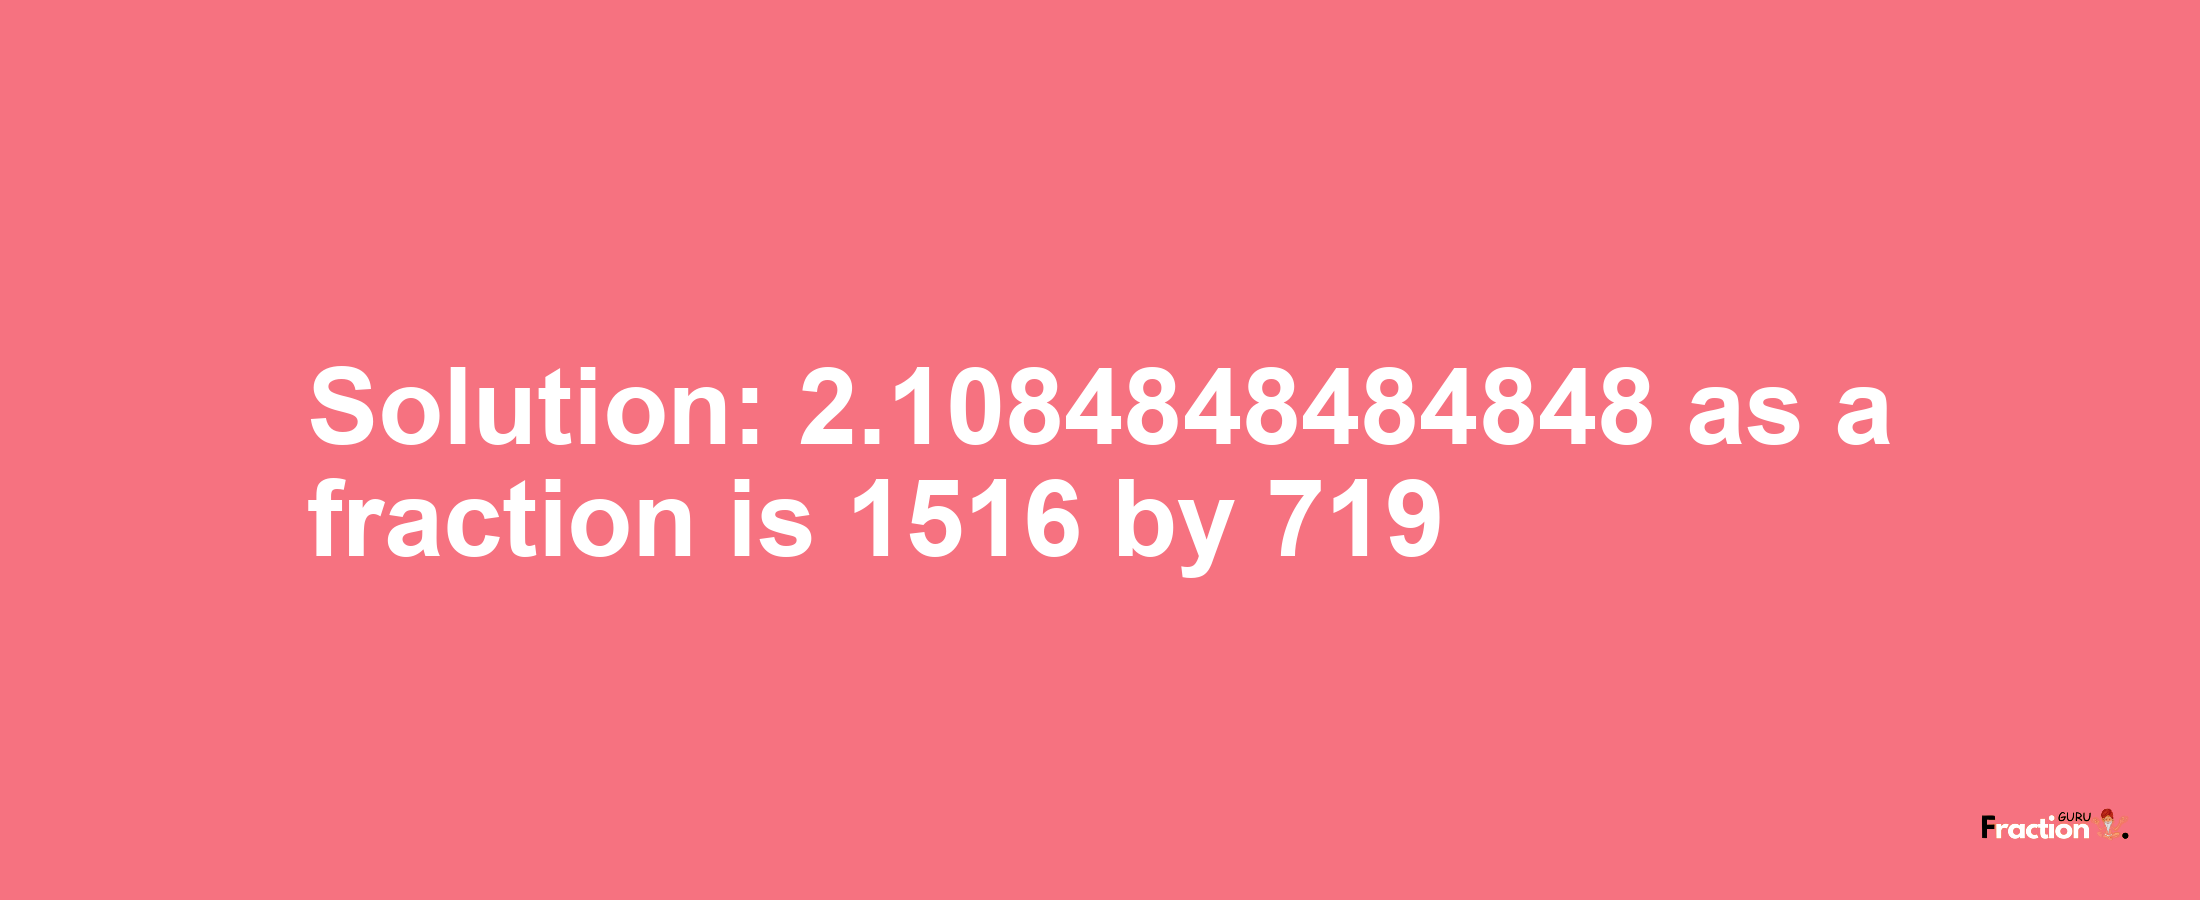 Solution:2.1084848484848 as a fraction is 1516/719